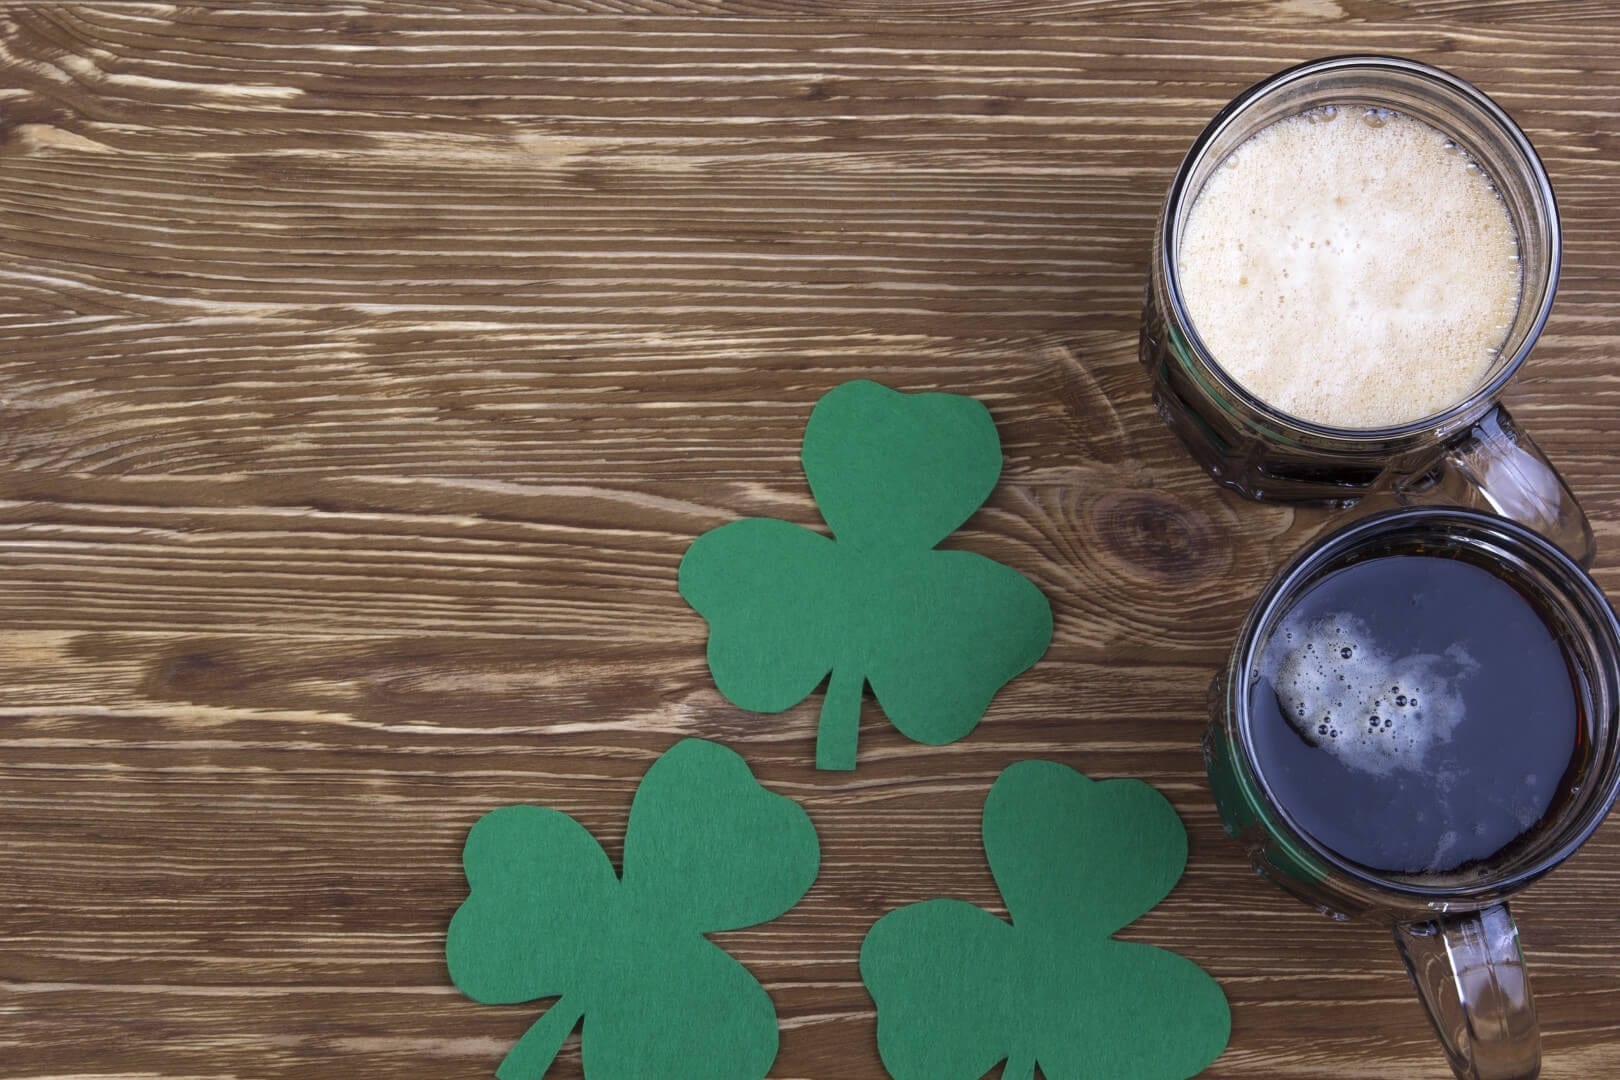 jersey-brewed stouts for st. patrick's day